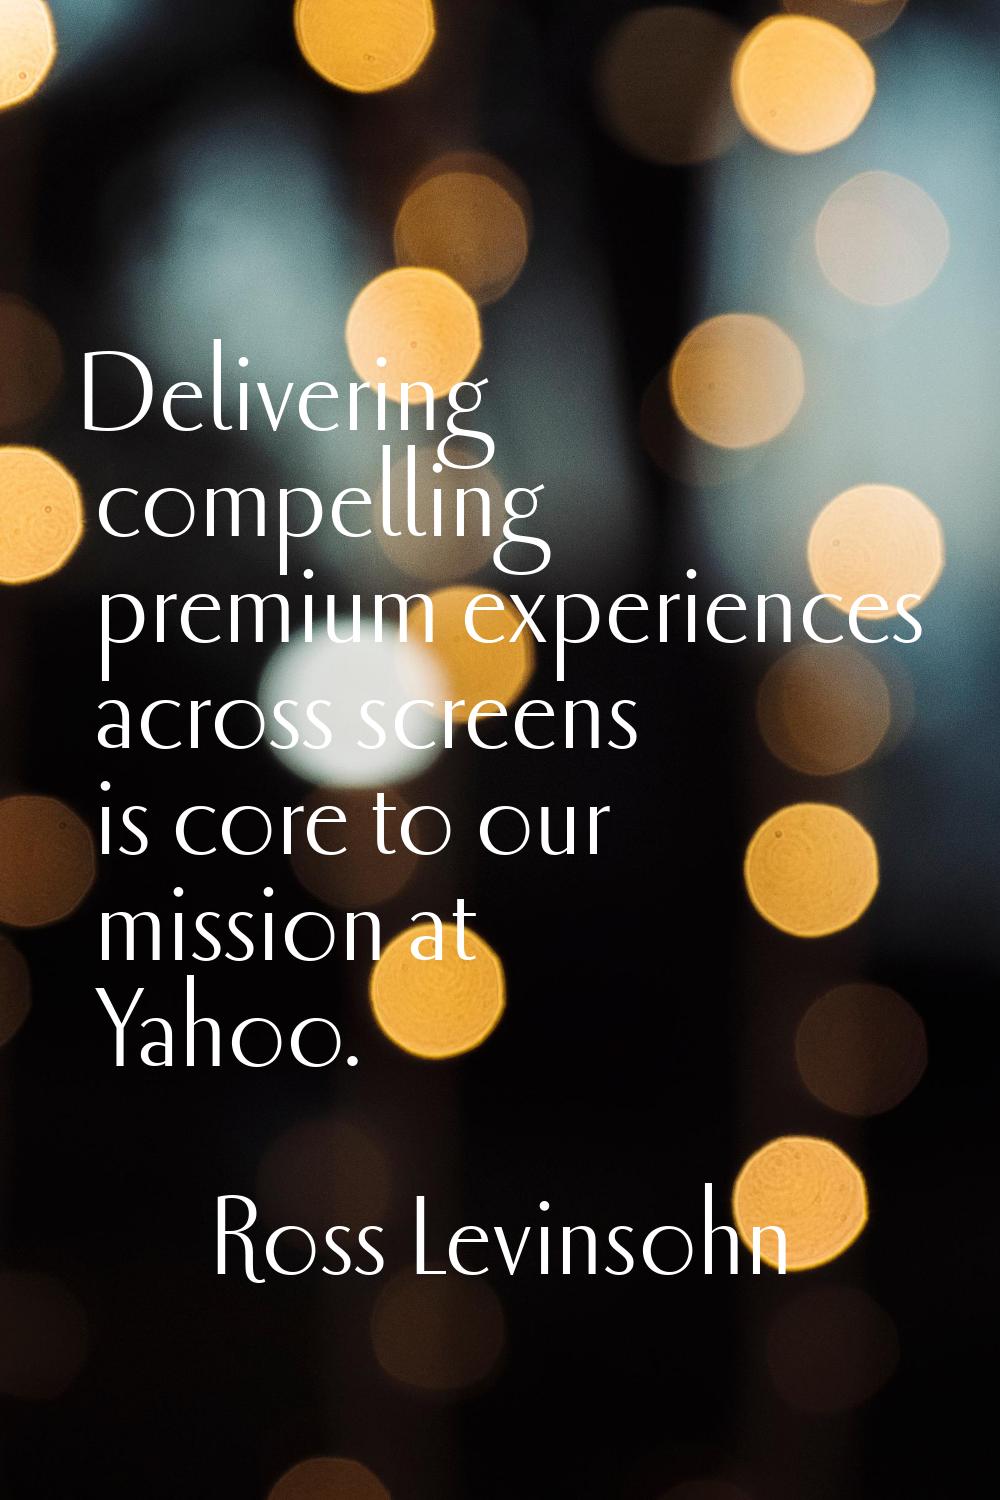 Delivering compelling premium experiences across screens is core to our mission at Yahoo.